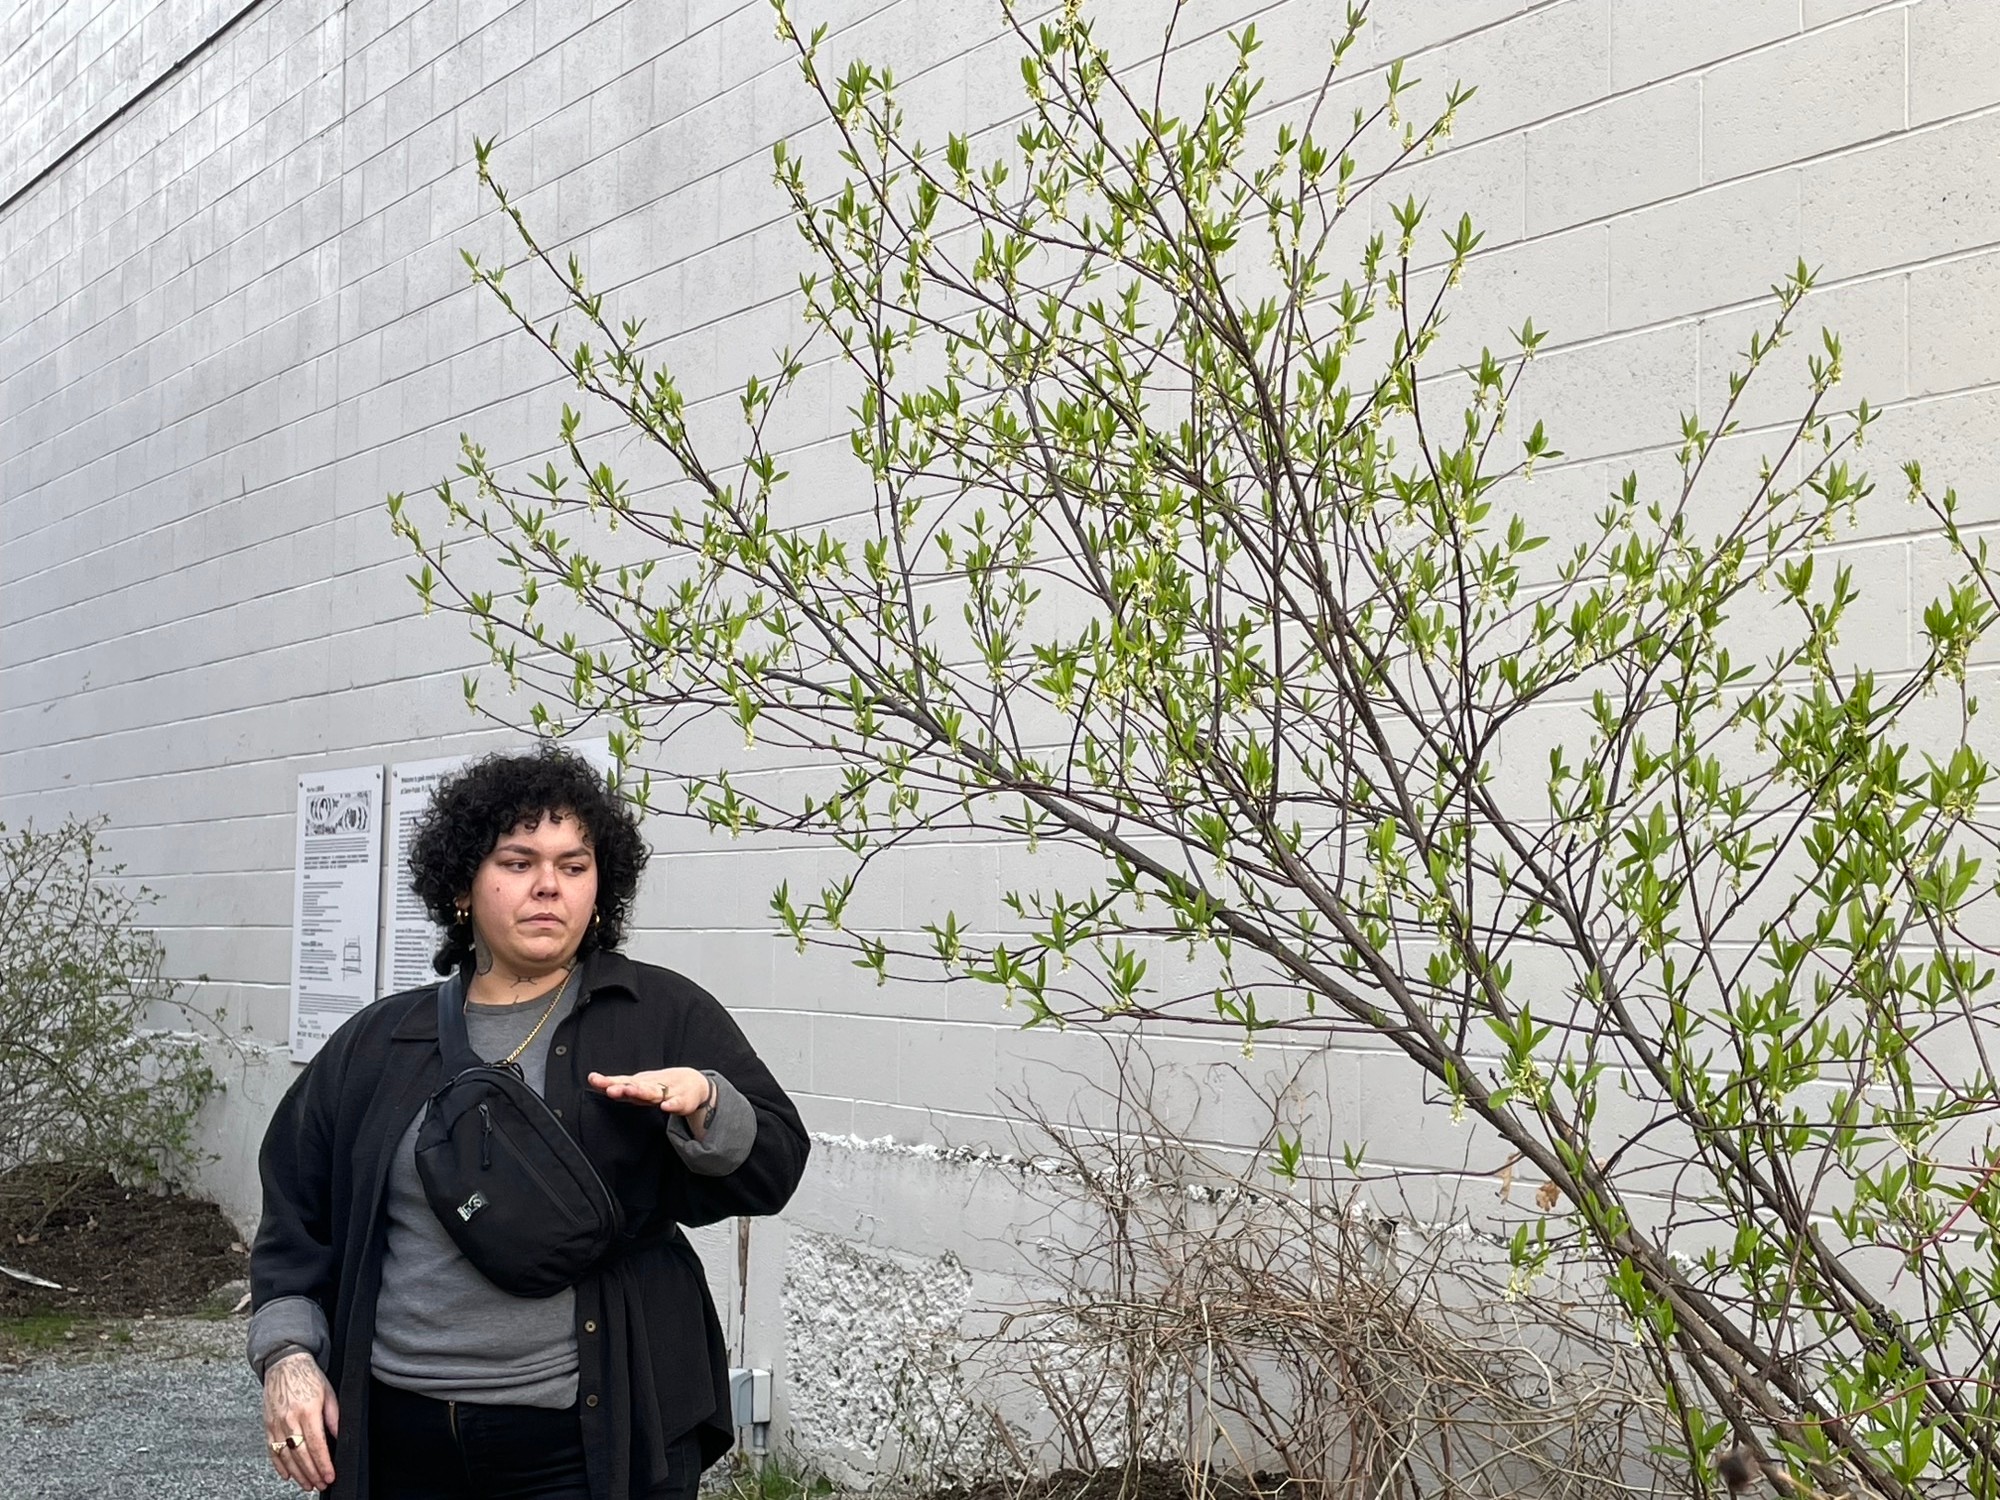 Jaz Whitford stants next to a plant in New Growth at Semi Public